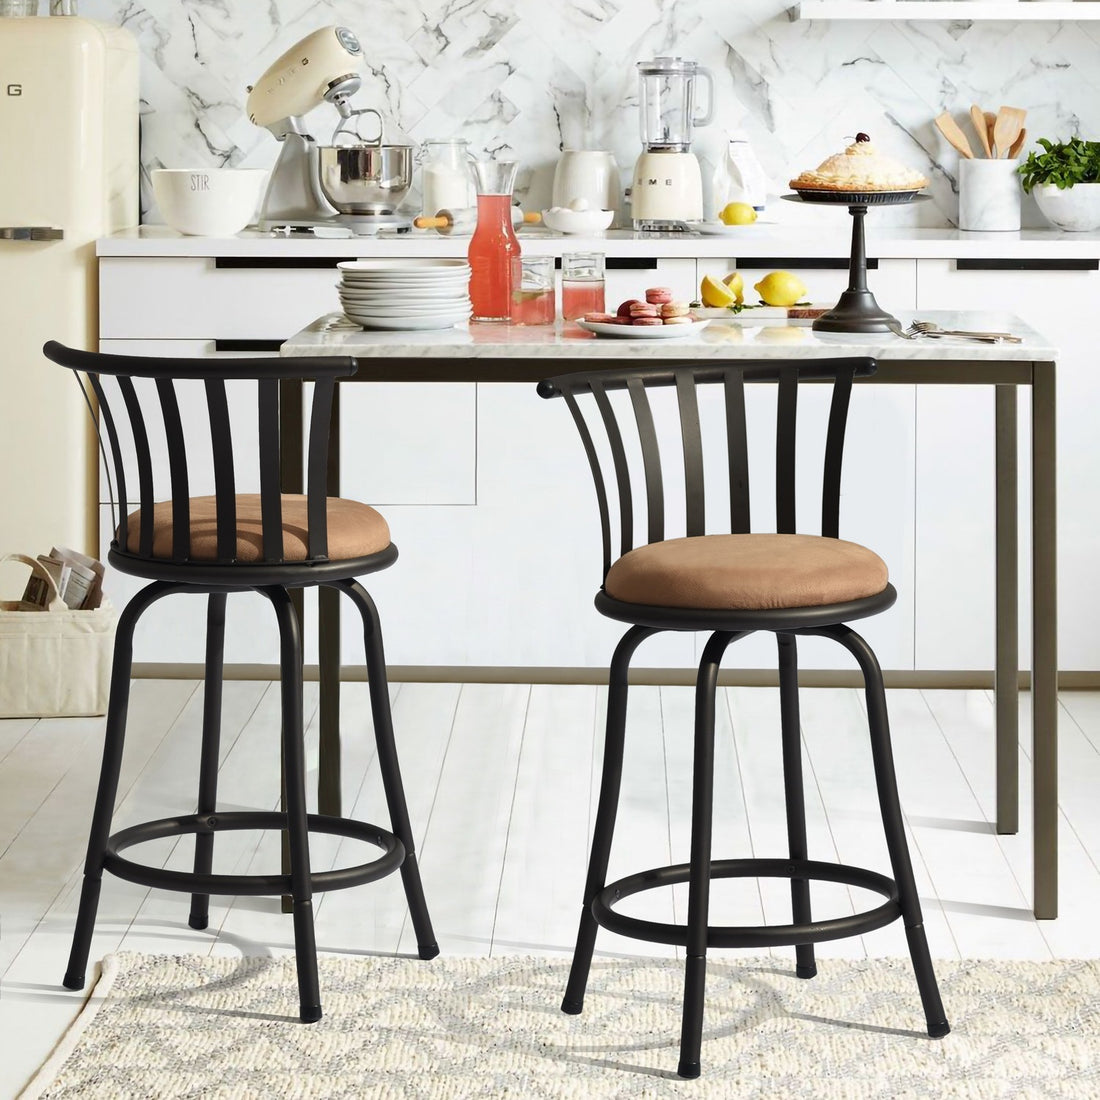 24'' Swivel Counter Height Bar Stools Set of 2, Brown brown-steel-upholstered